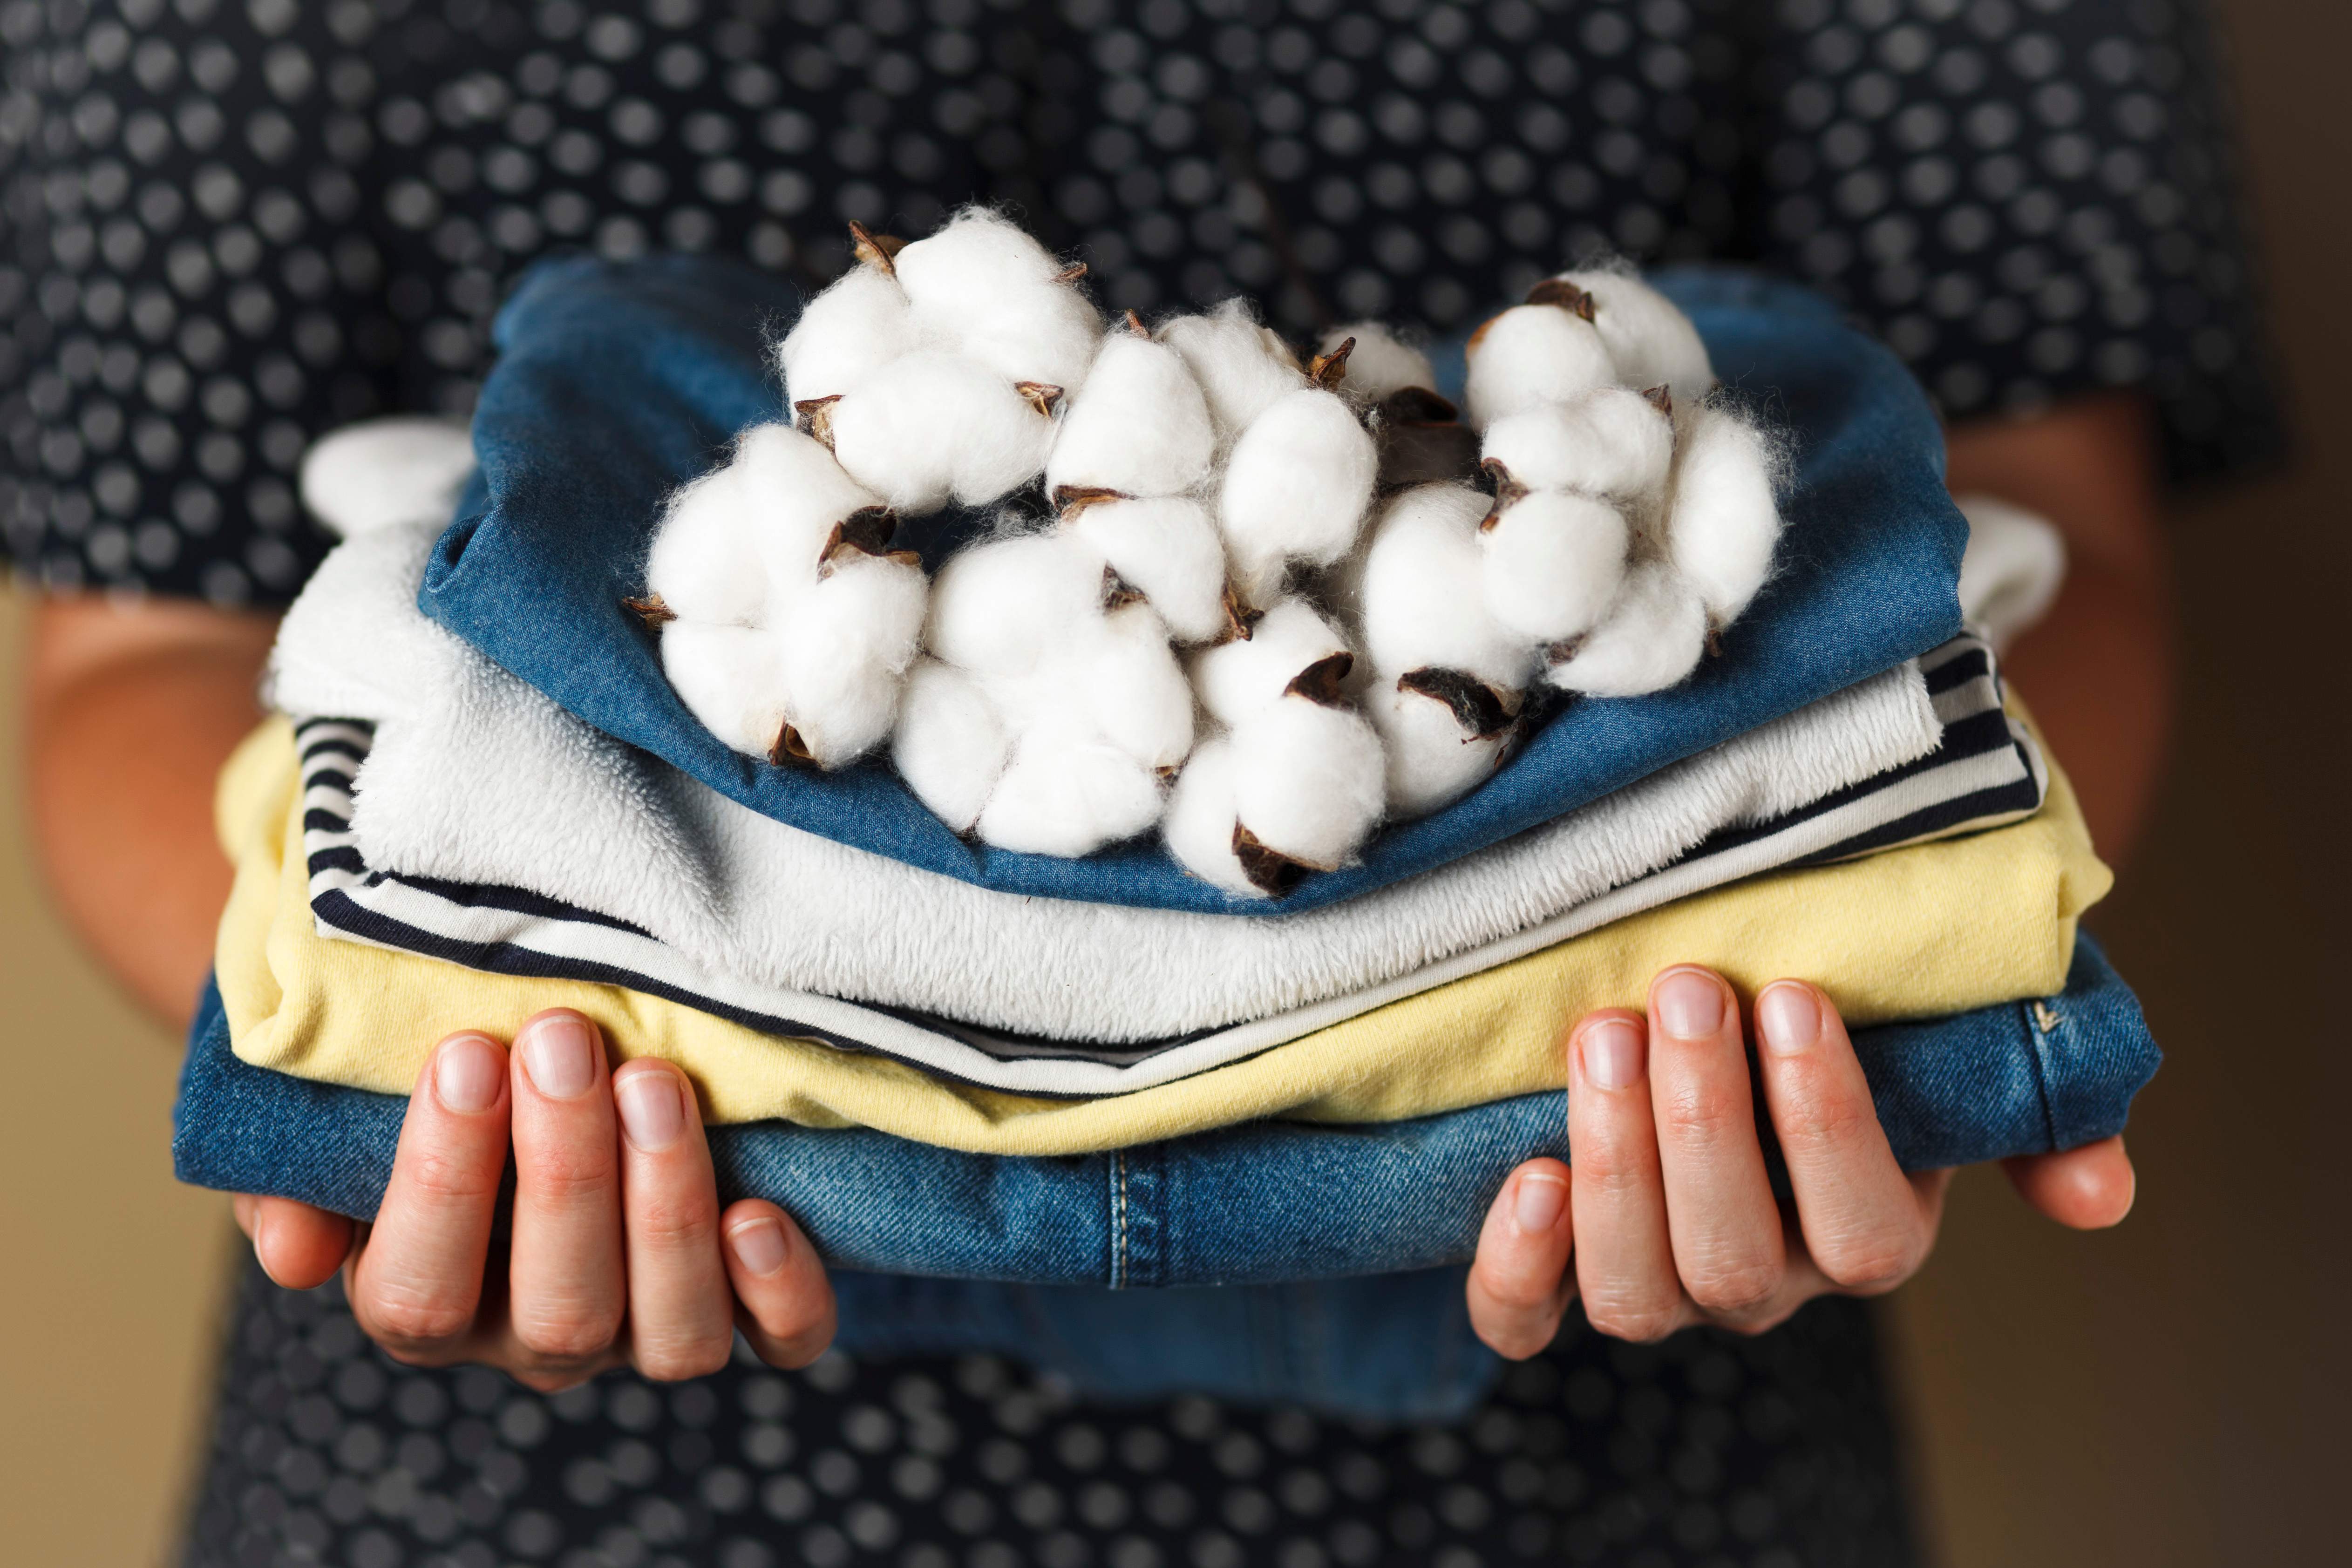 10 Reasons Why You Should Buy Eco-friendly Cotton Clothing